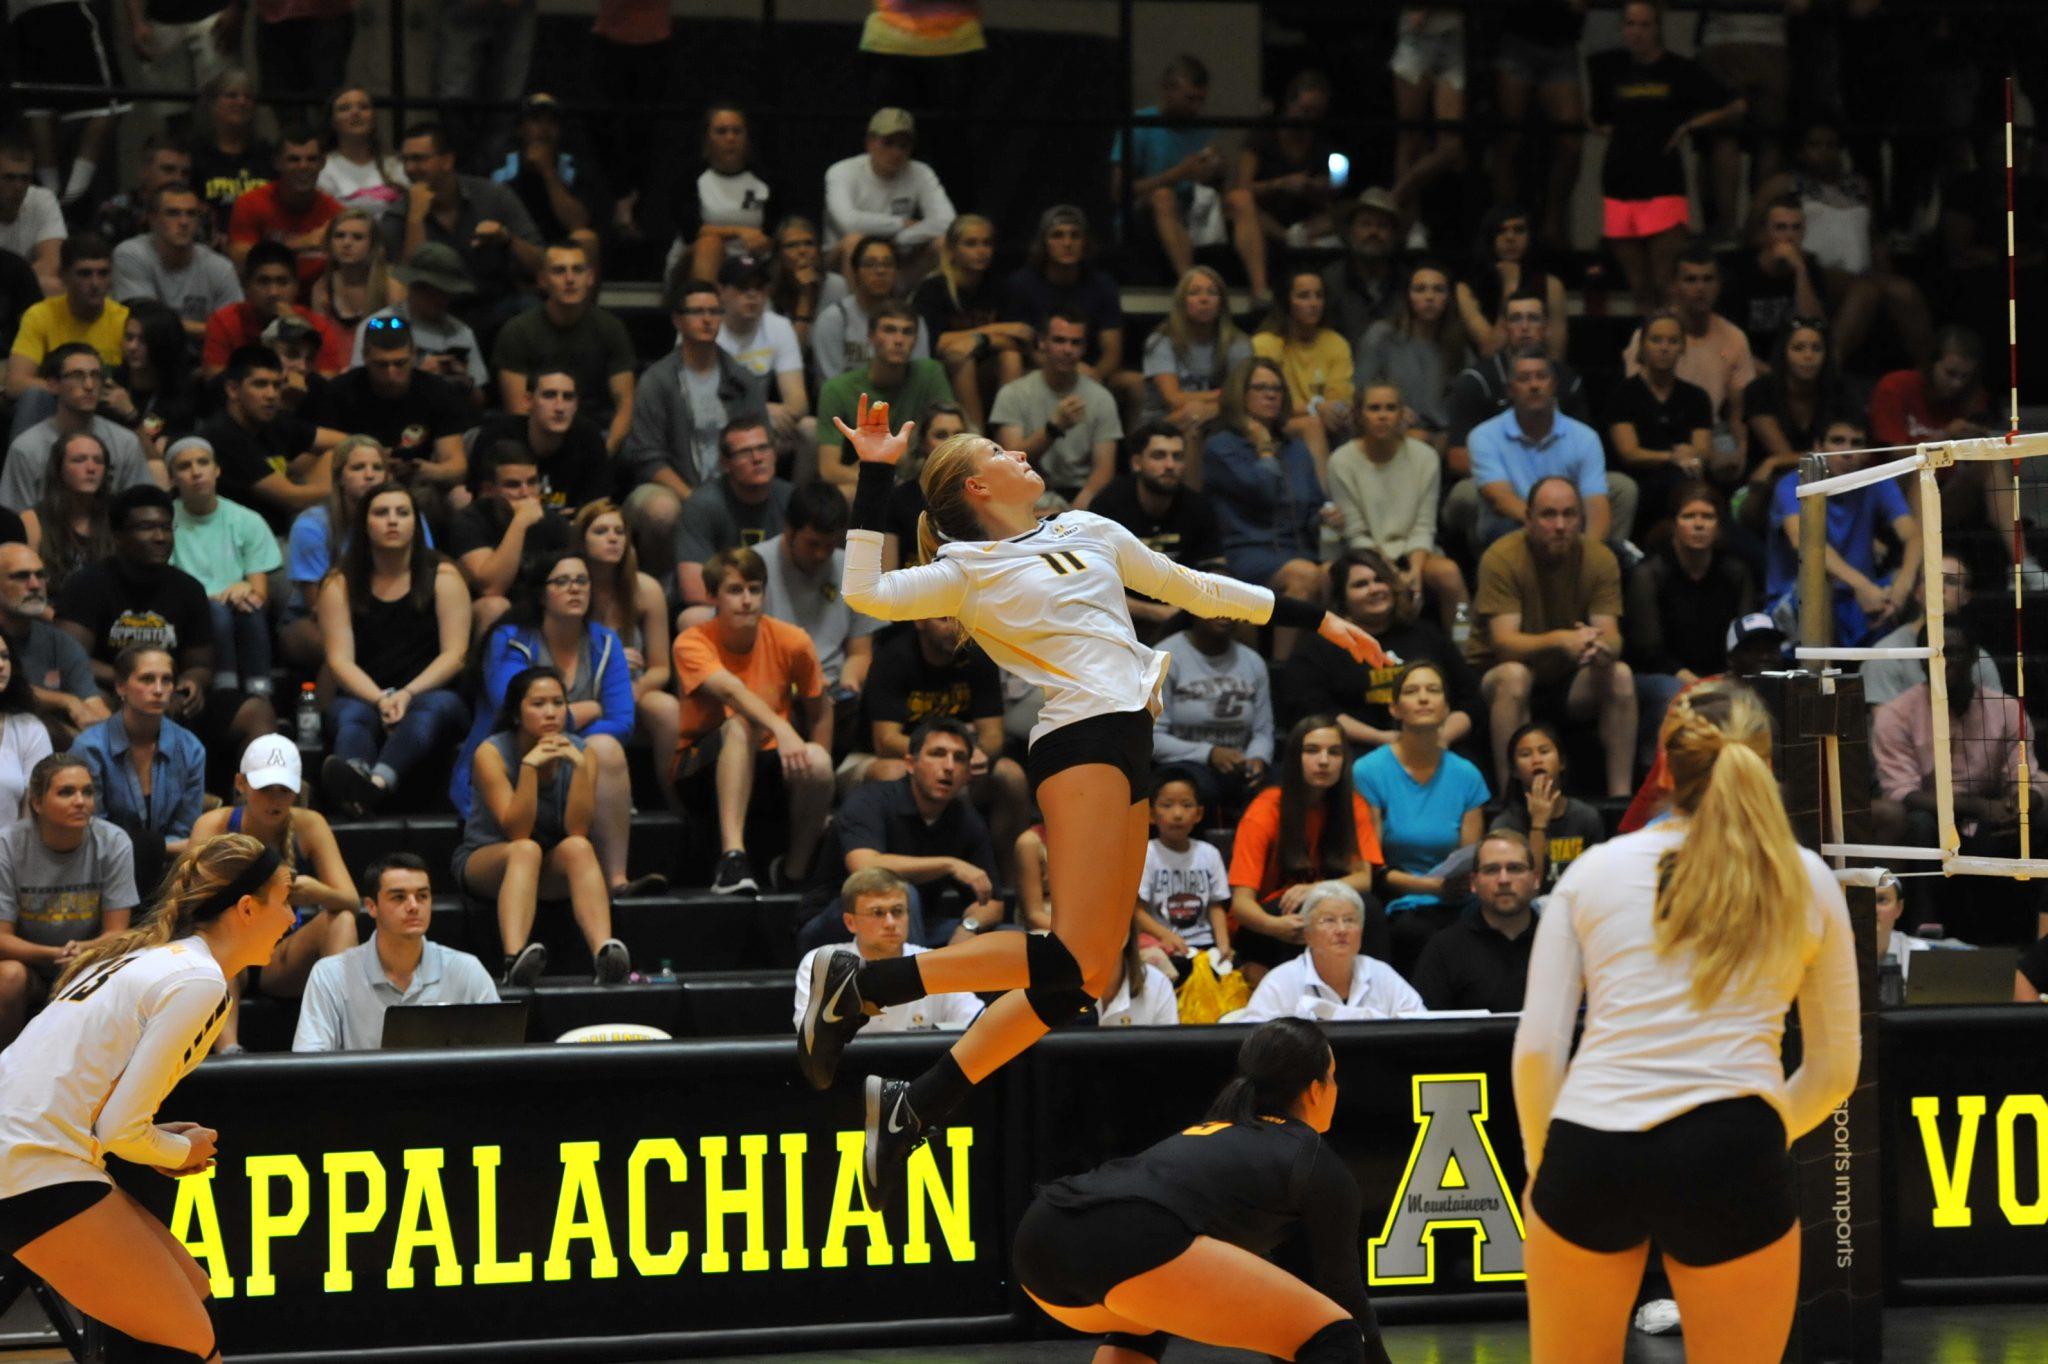 Freshman Emma Longley goes up for a spike during Friday's game. Courtesy: Dave Mayo/Appalachian State Athletics
